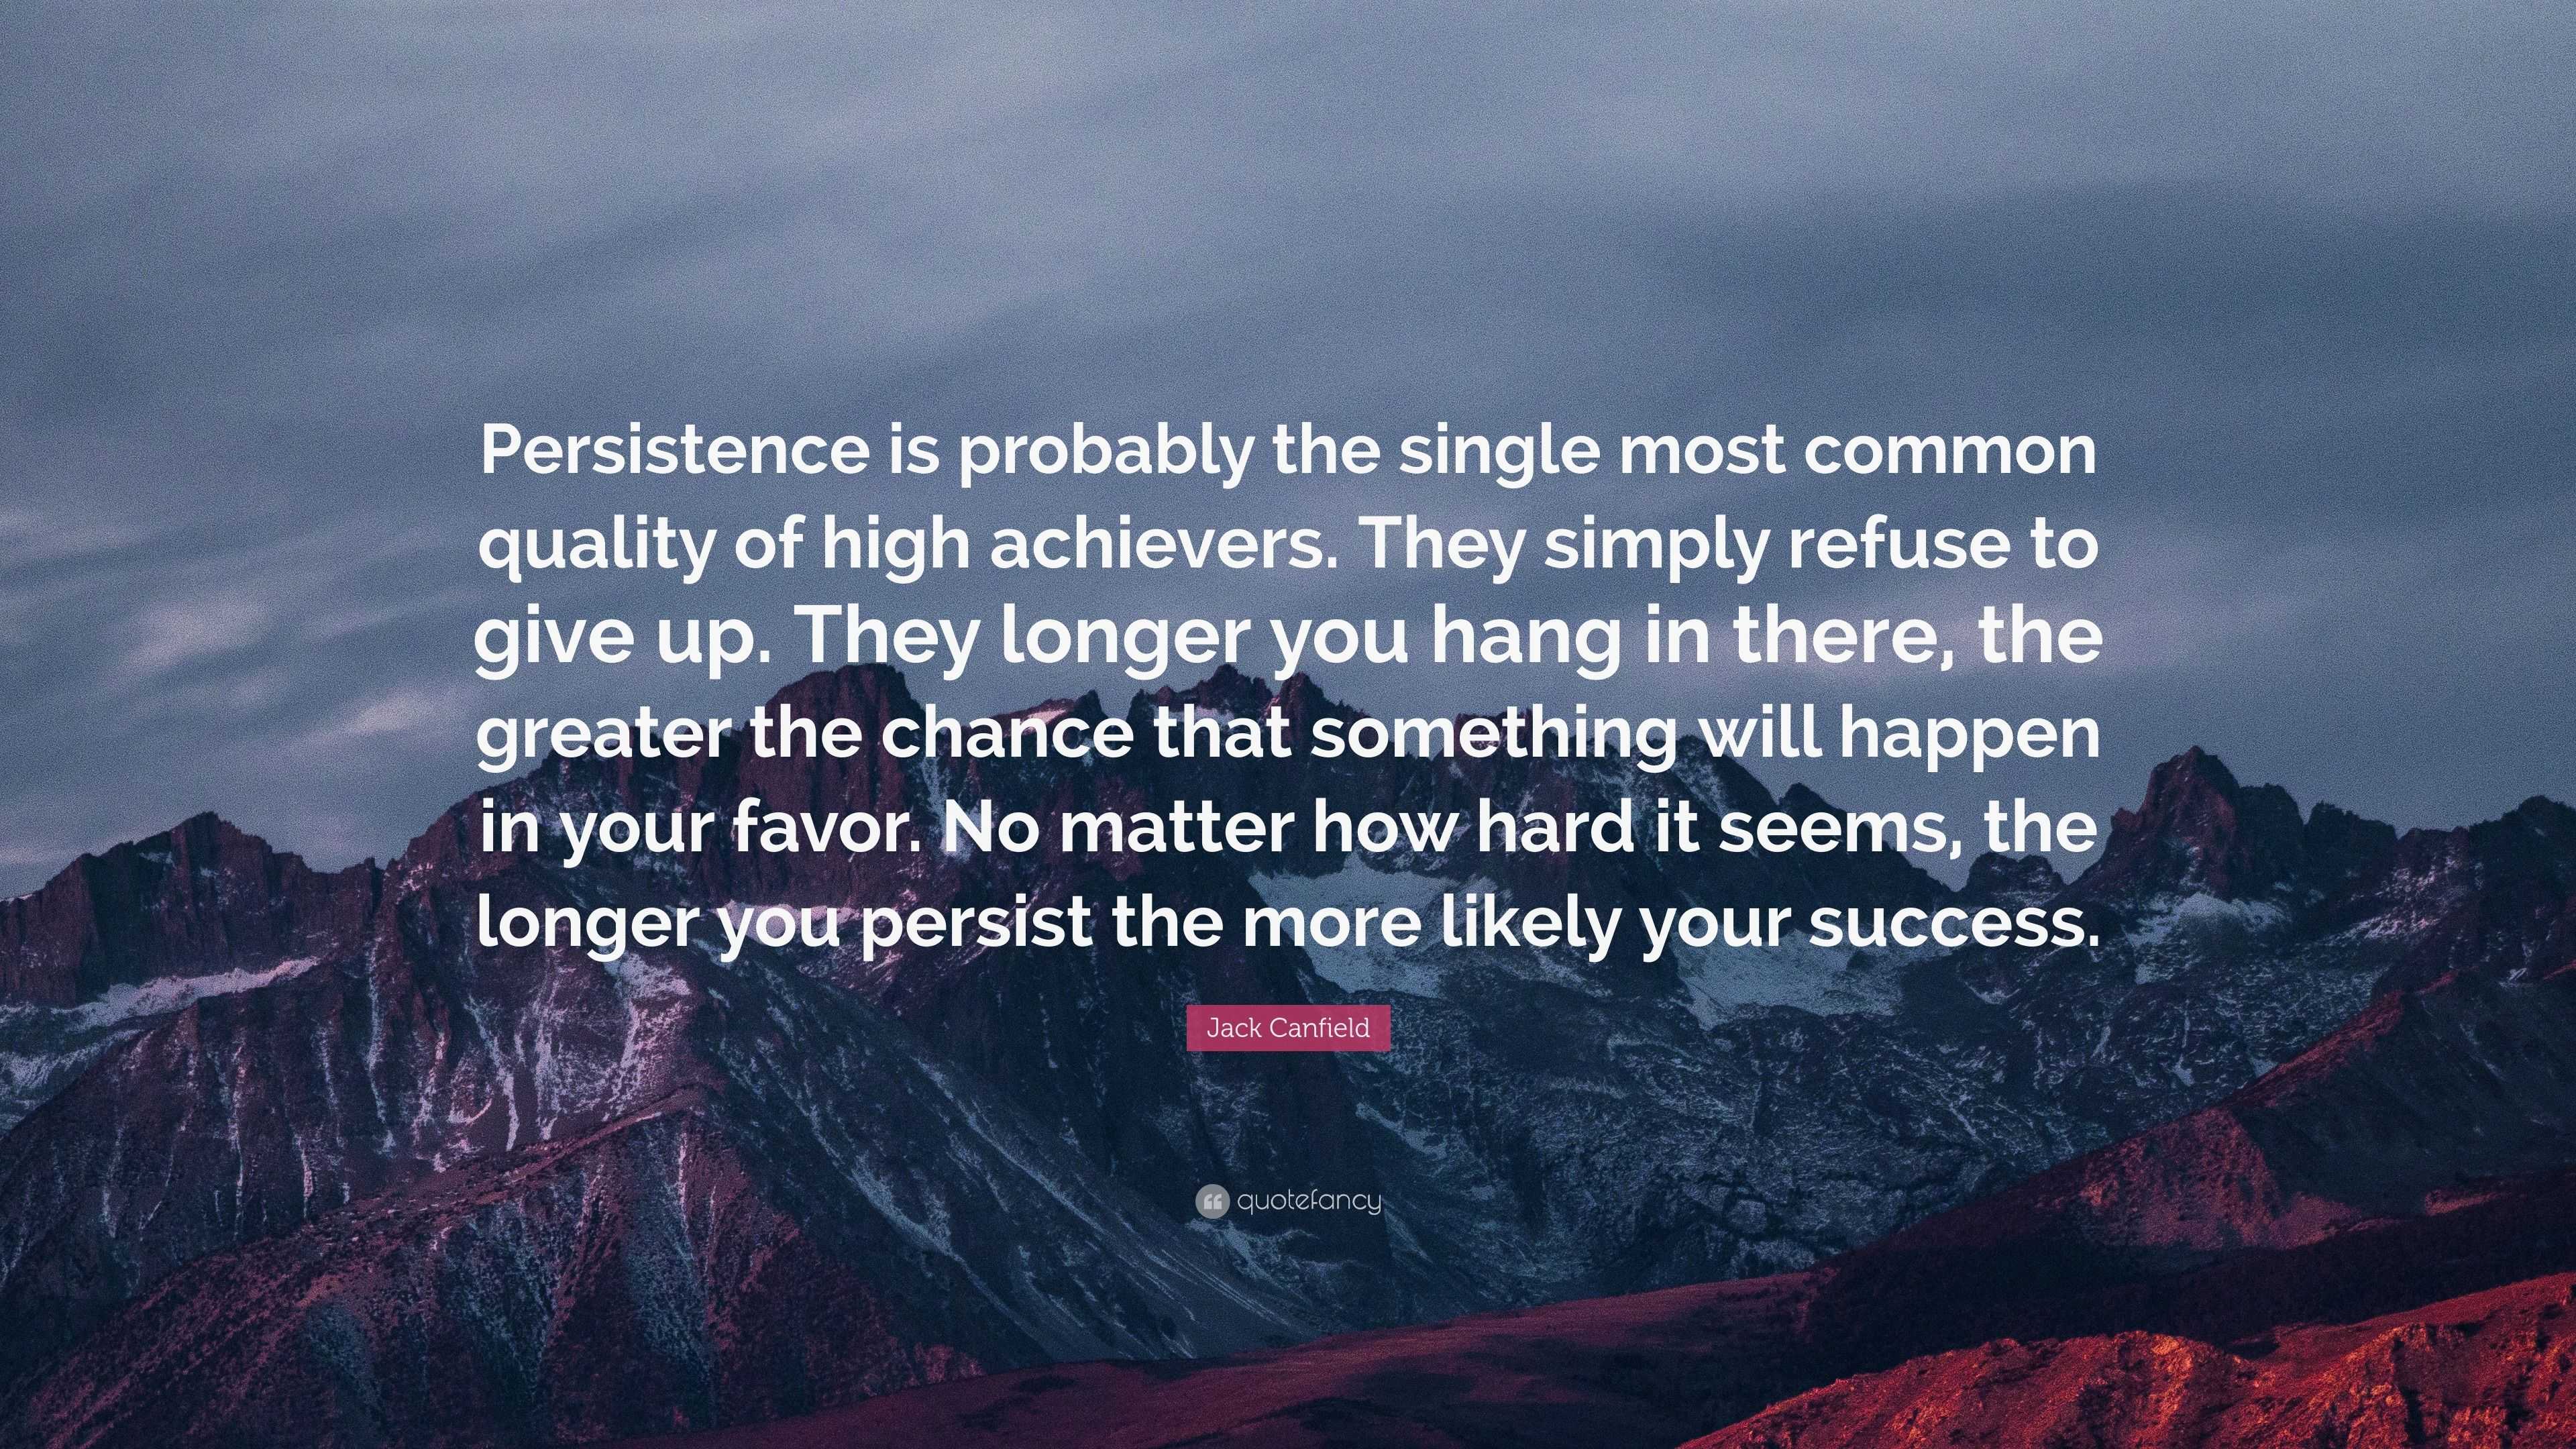 Jack Canfield Quote: “Persistence is probably the single most common ...